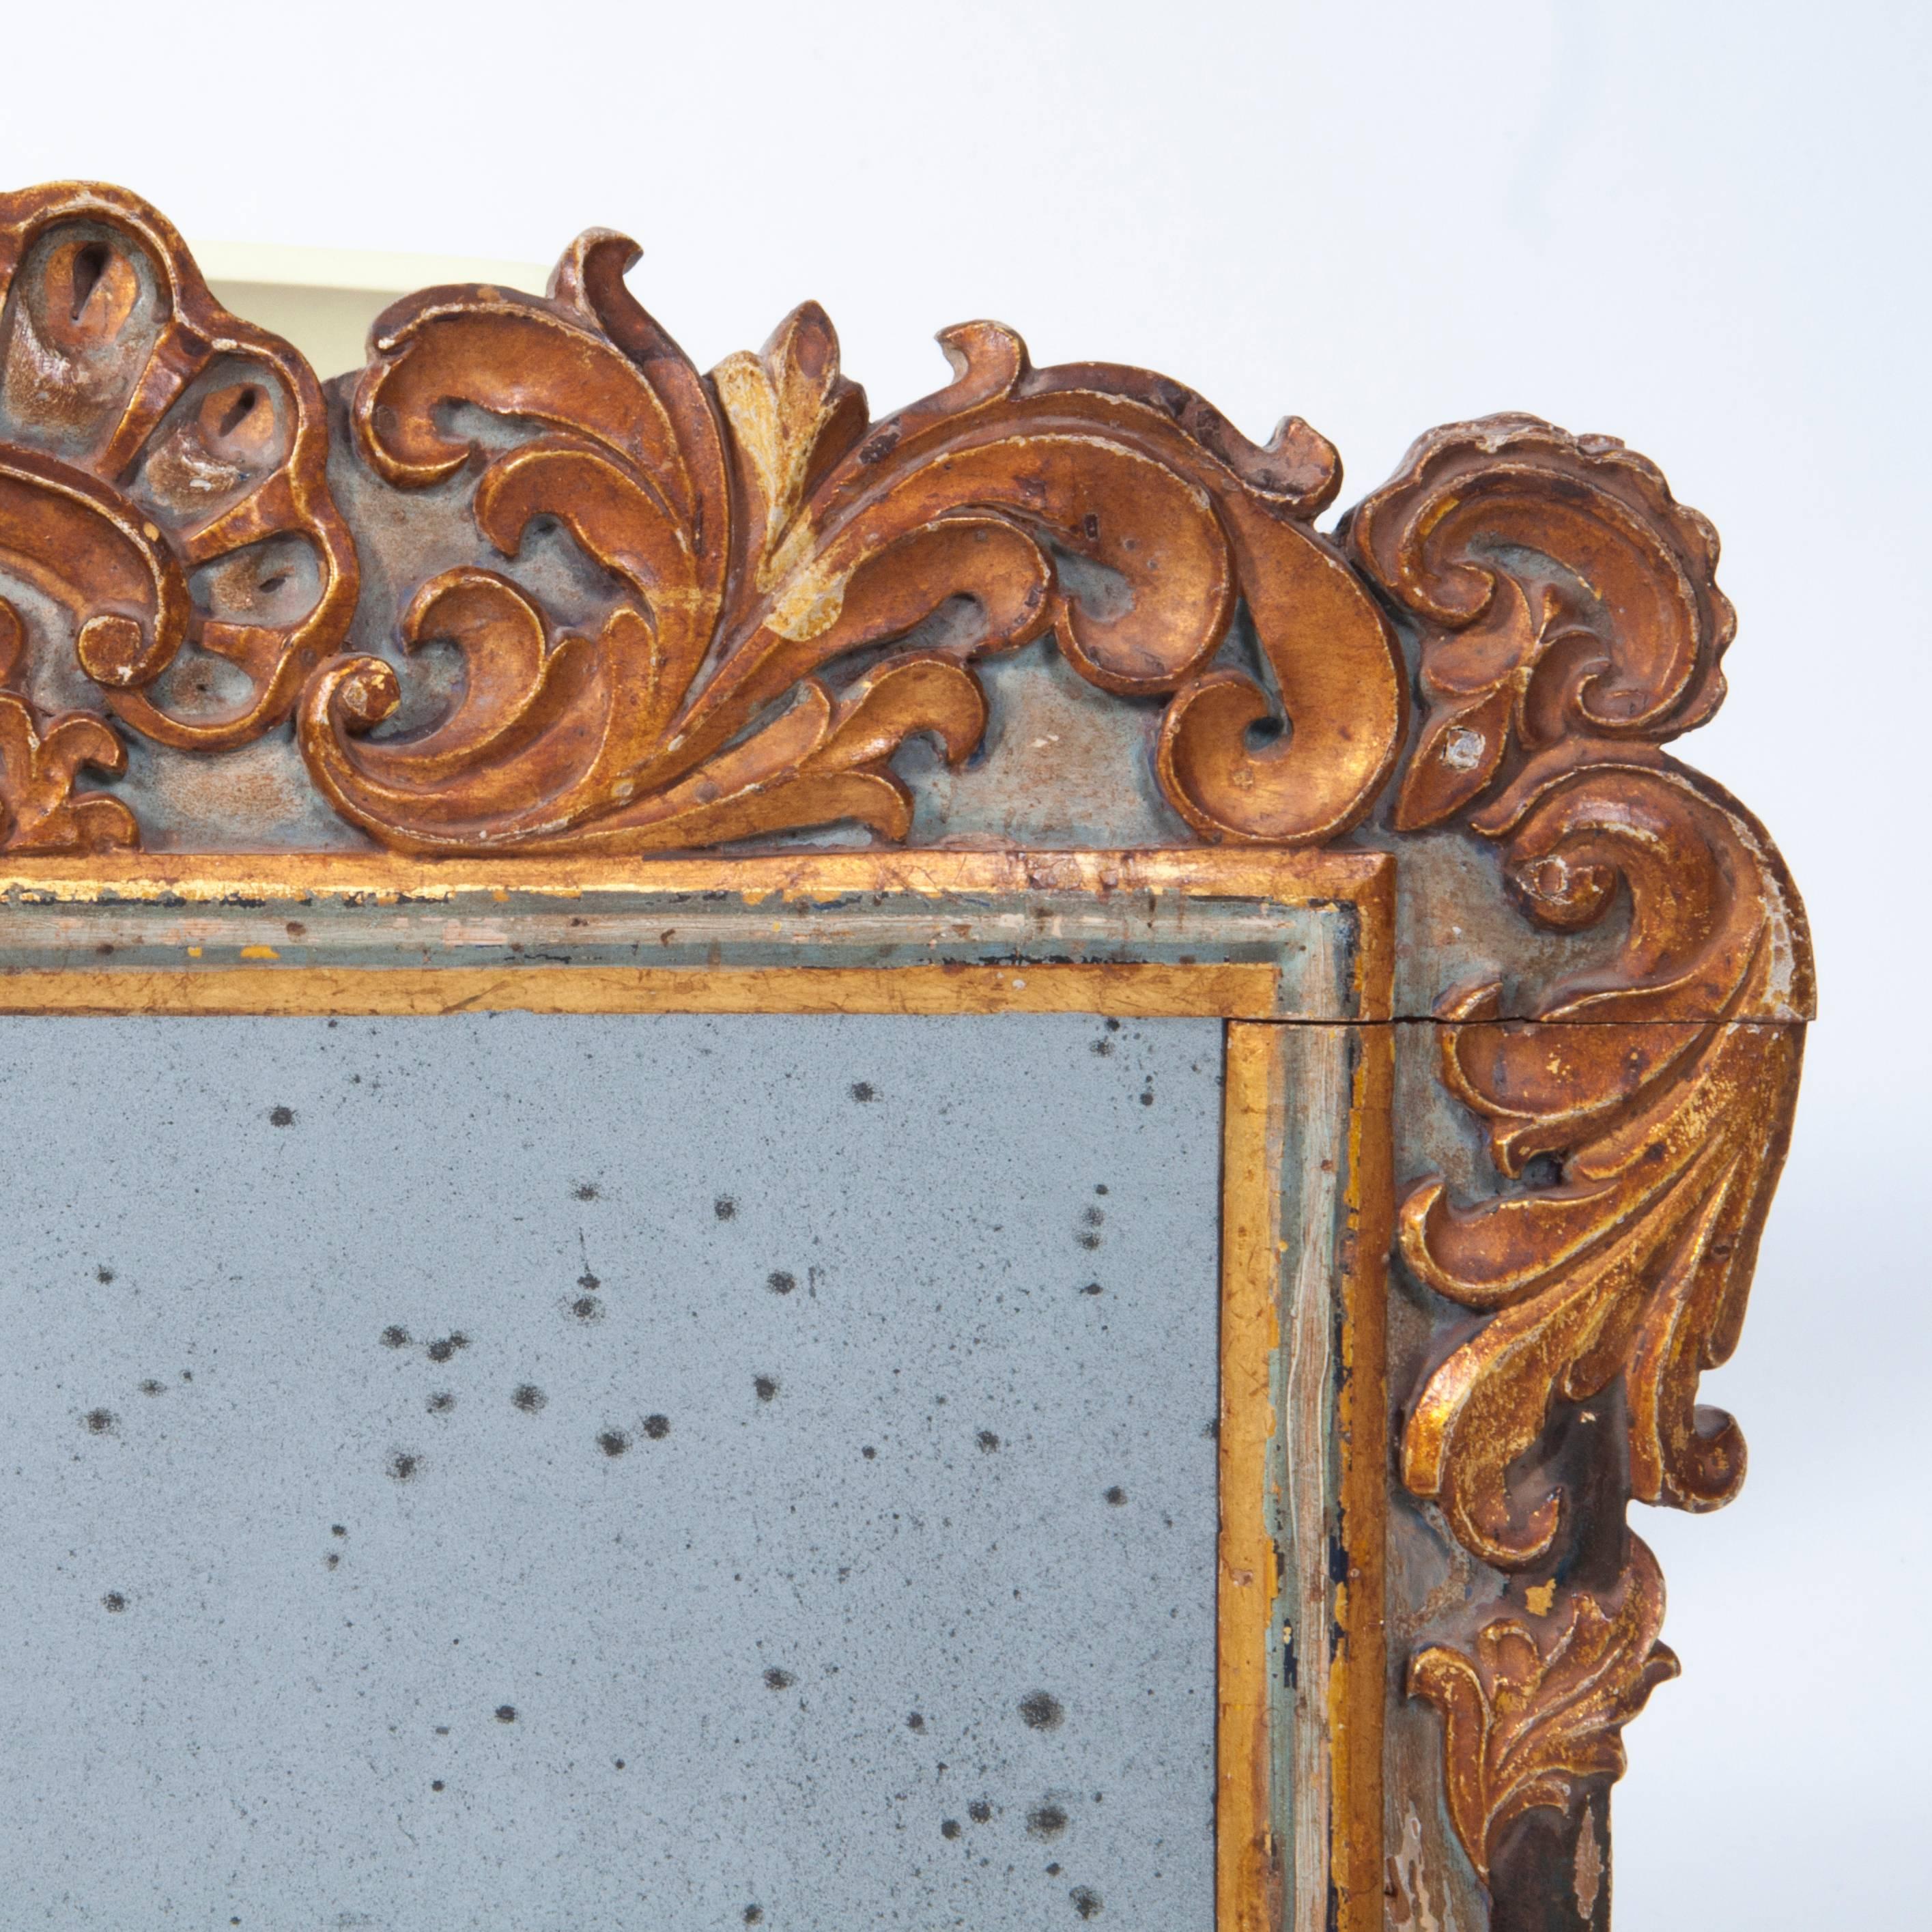 An excellent 18th century gilded wood wall mirror with exceptional foliage carving and a Baroque rocaille crest with original mercury glass and a beautiful patina.